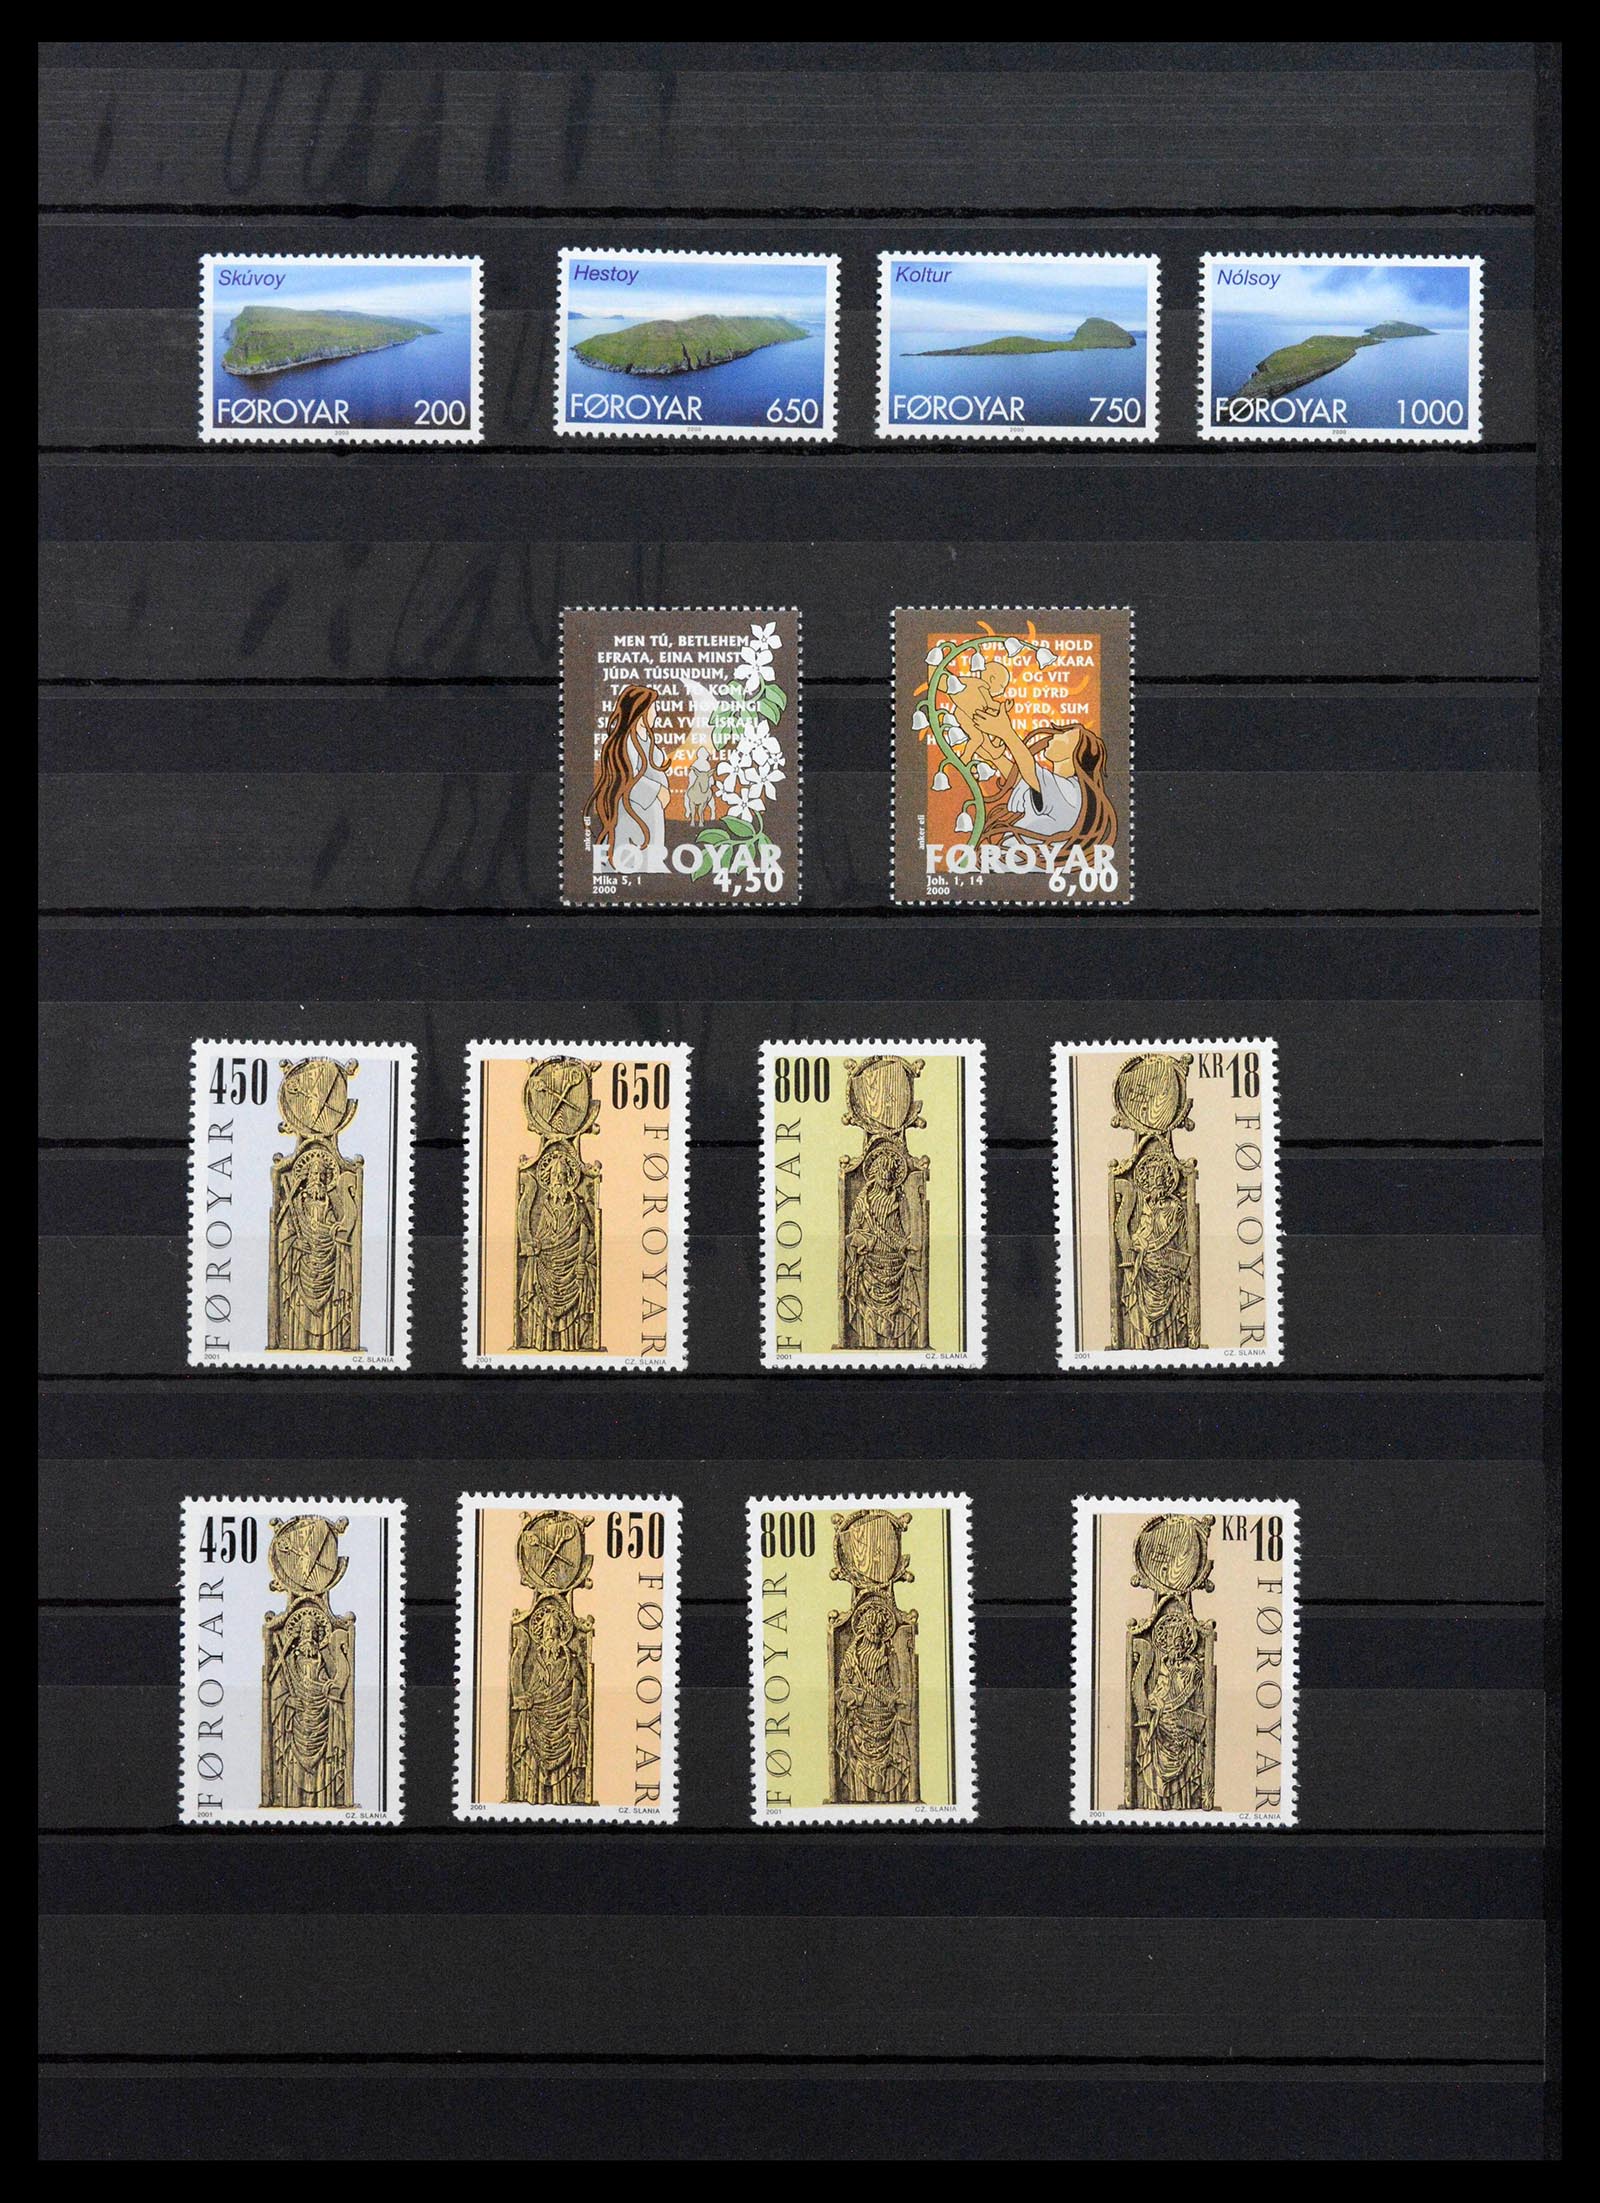 39021 0043 - Stamp collection 39021 Faroe islands 1940-2000.